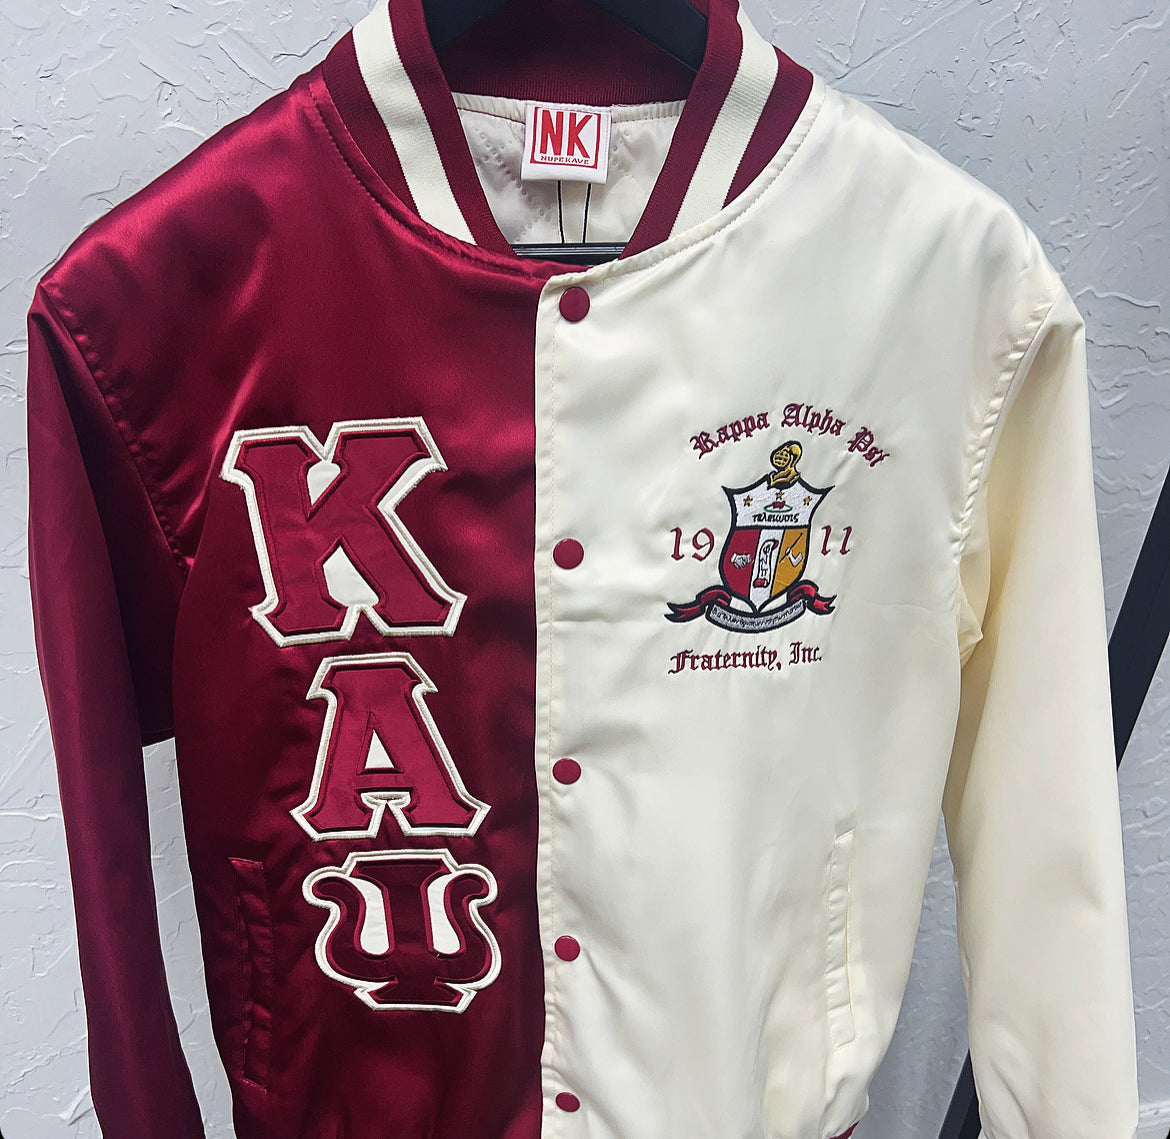 Show off your Kappa Alpha Psi pride with this stylish satin baseball jacket. Featuring the fraternity's iconic colors and crest, this jacket is perfect for any member of Kappa Alpha Psi. Made with high-quality materials, this jacket is not only fashionable but also durable. Represent your organization in style with this must-have addition to your wardrobe.